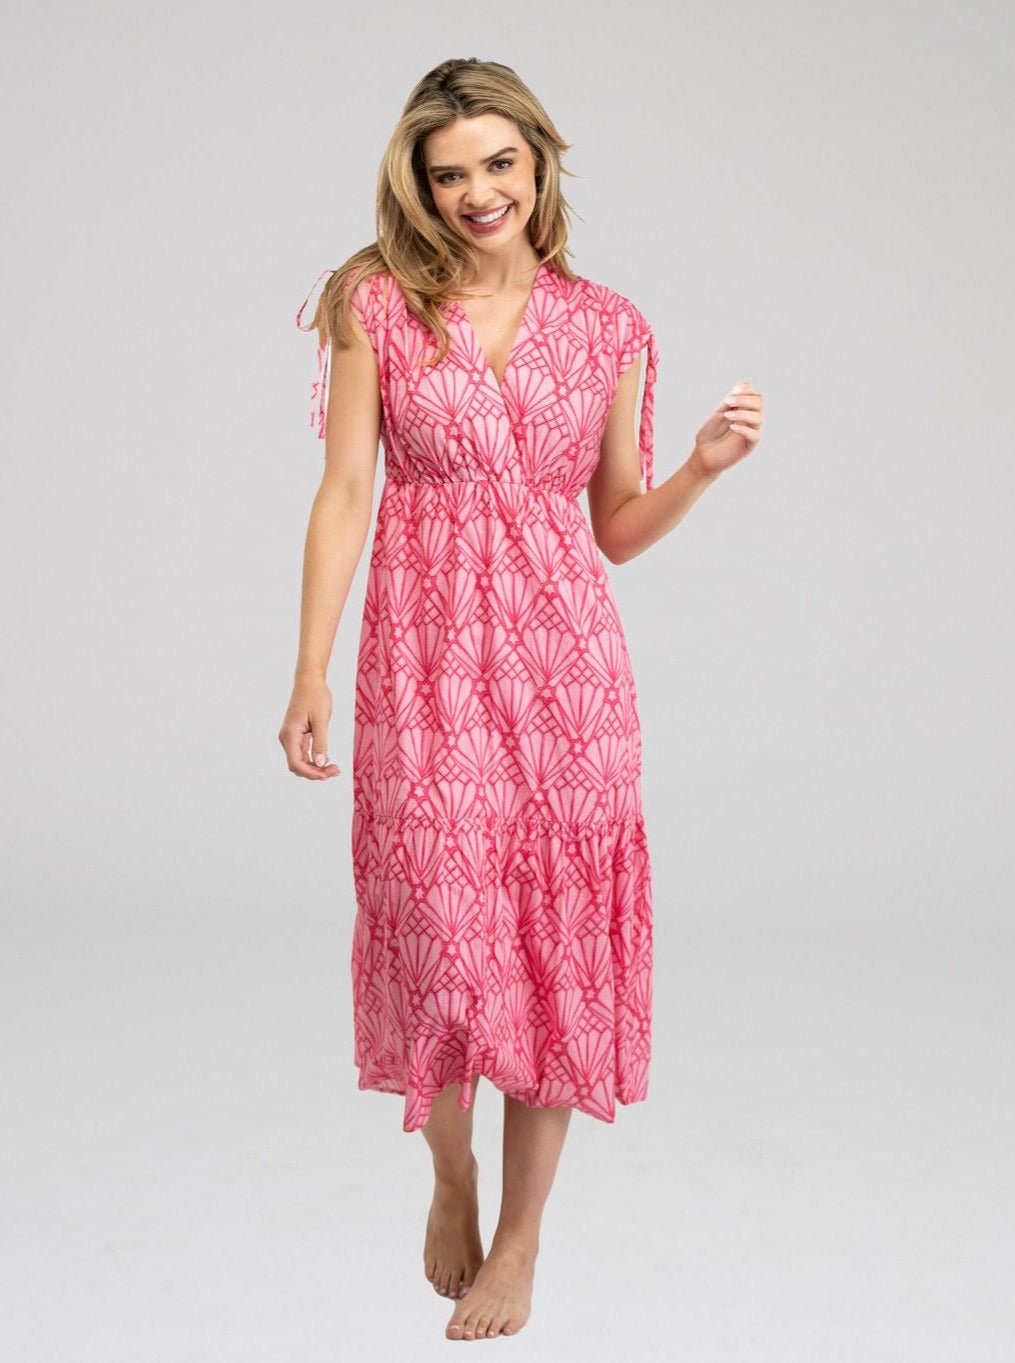 Beau & Ro Dress Small SAMPLE | The Blaire Dress | Starburst Pink | Small